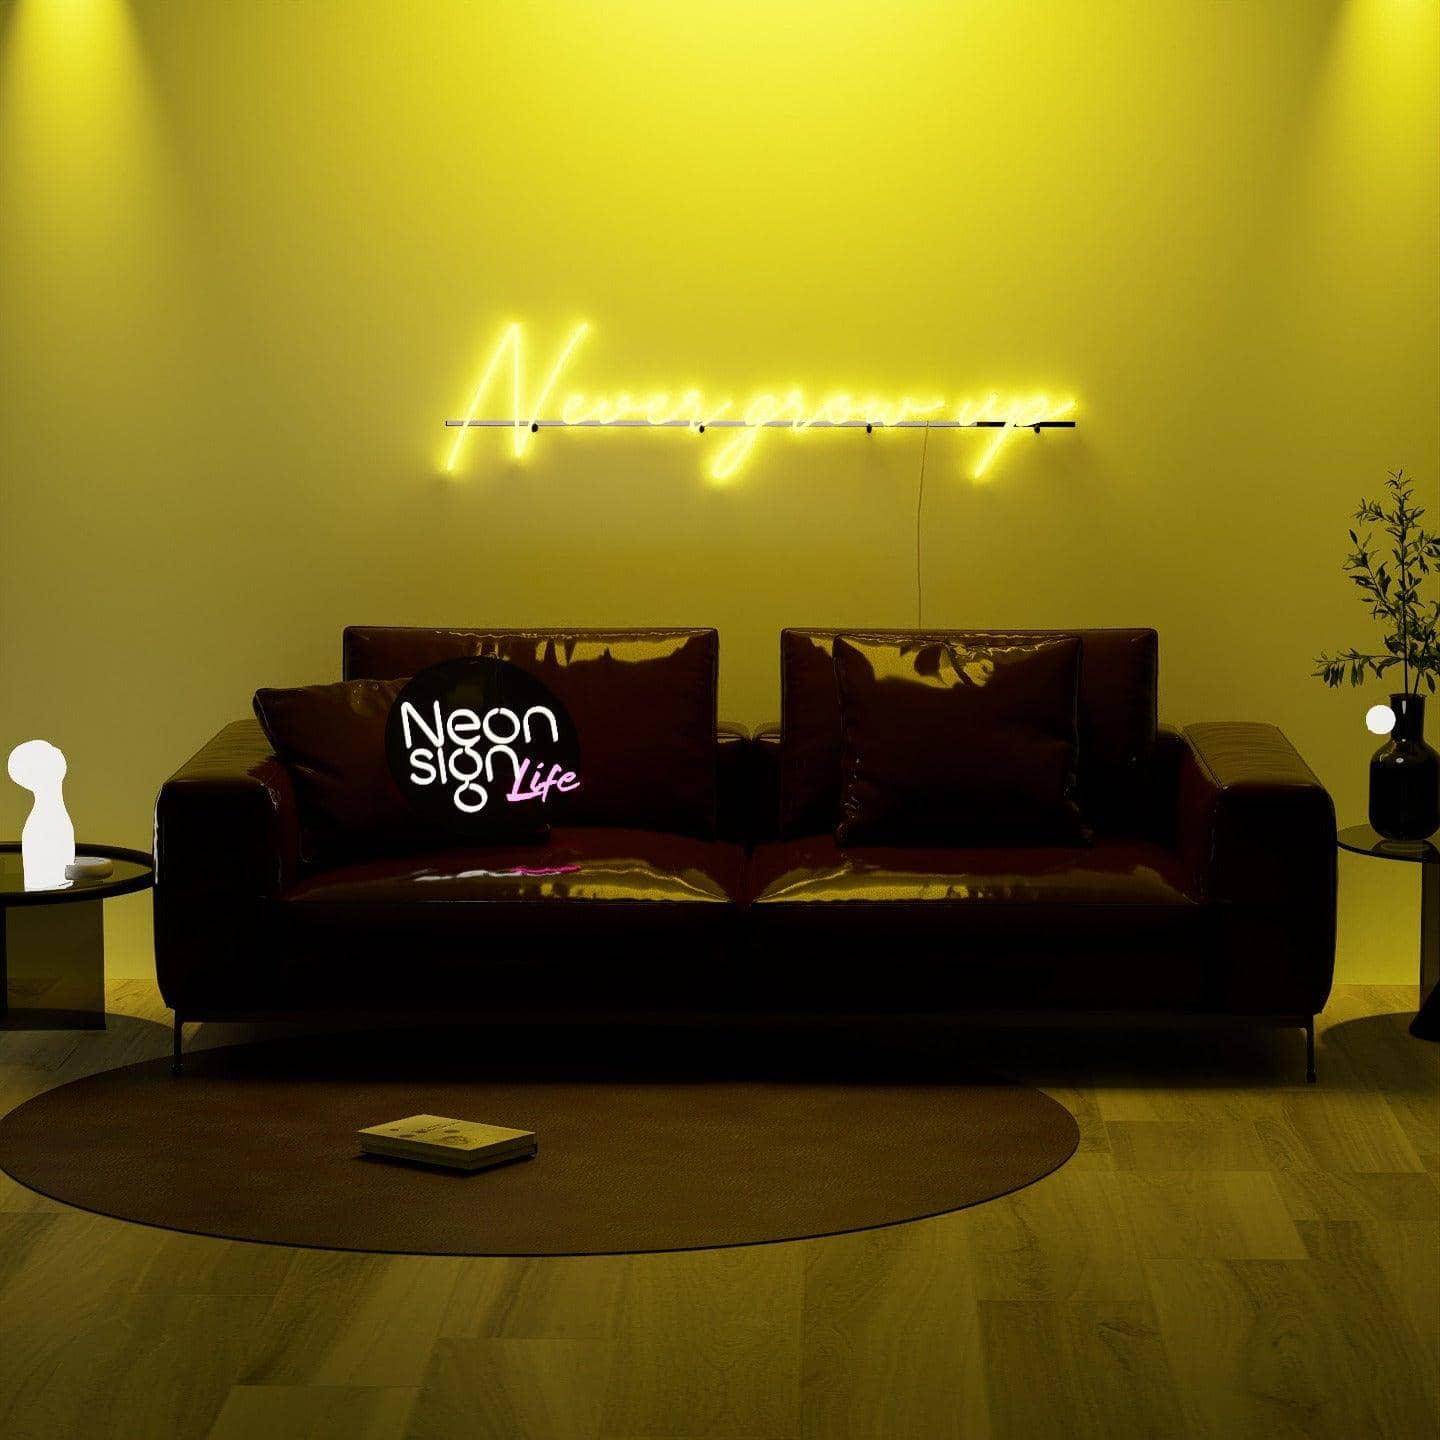 golden-neon-lights-illuminated-in-the-dark-and-hung-on-the-wall-for-display-never-grow-up